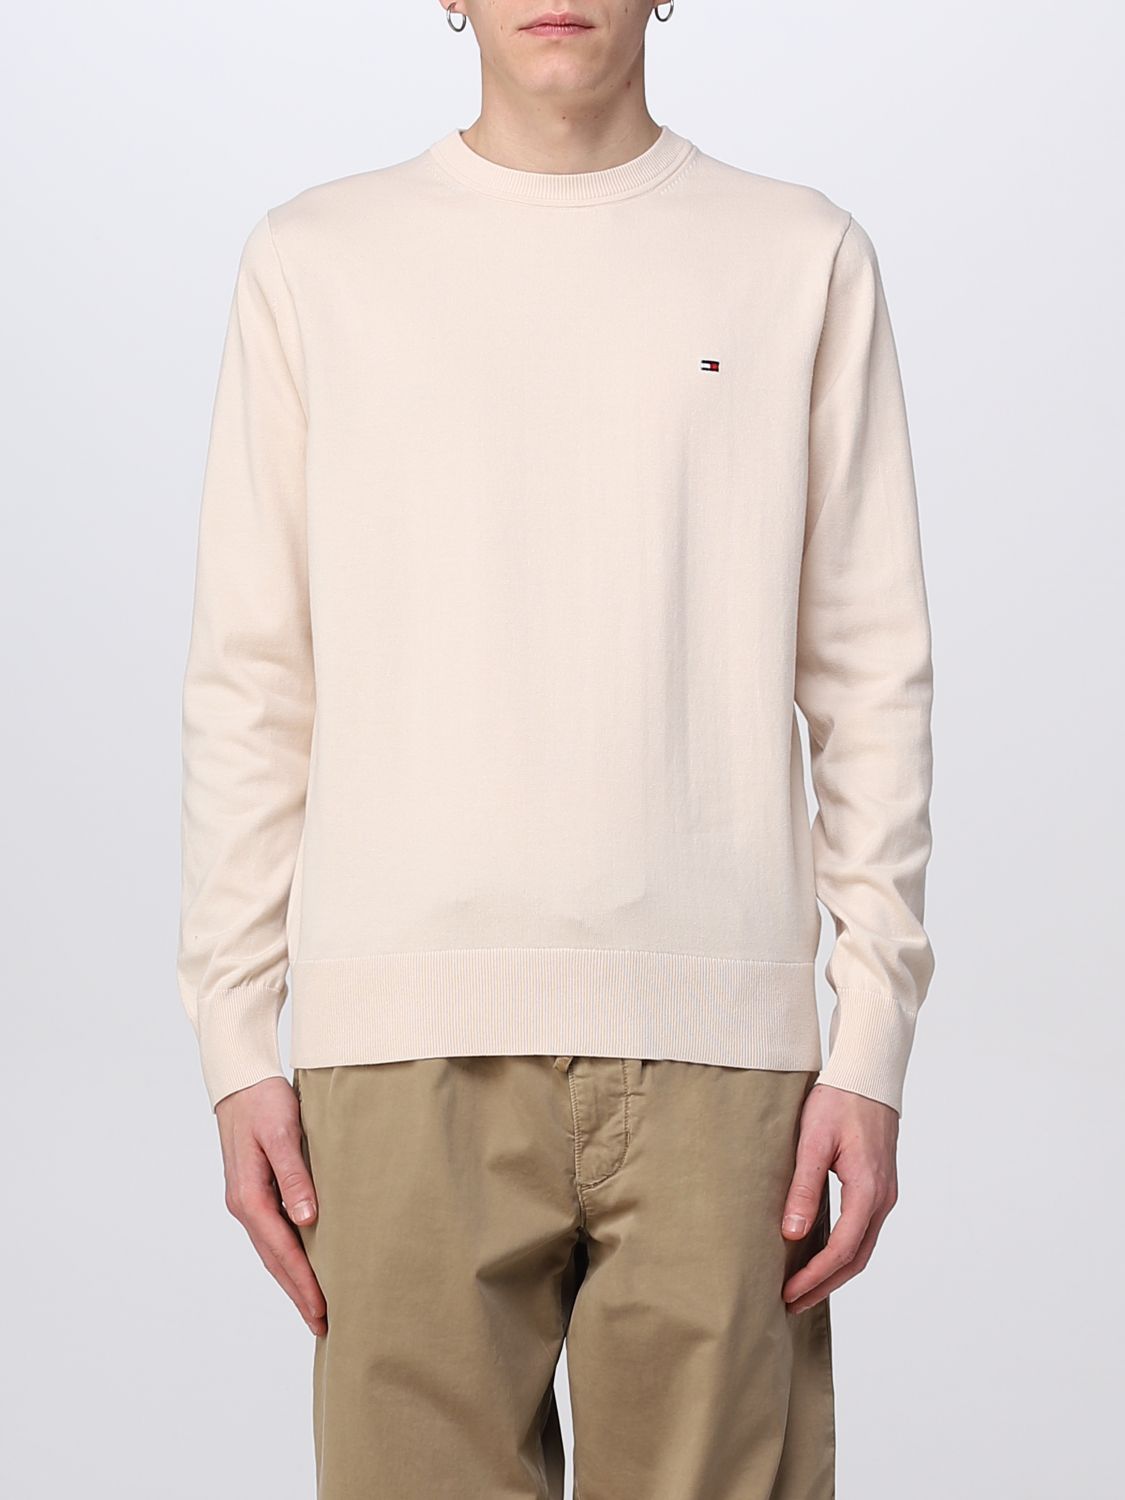 TOMMY HILFIGER: sweater for man - White | Tommy Hilfiger sweater ...